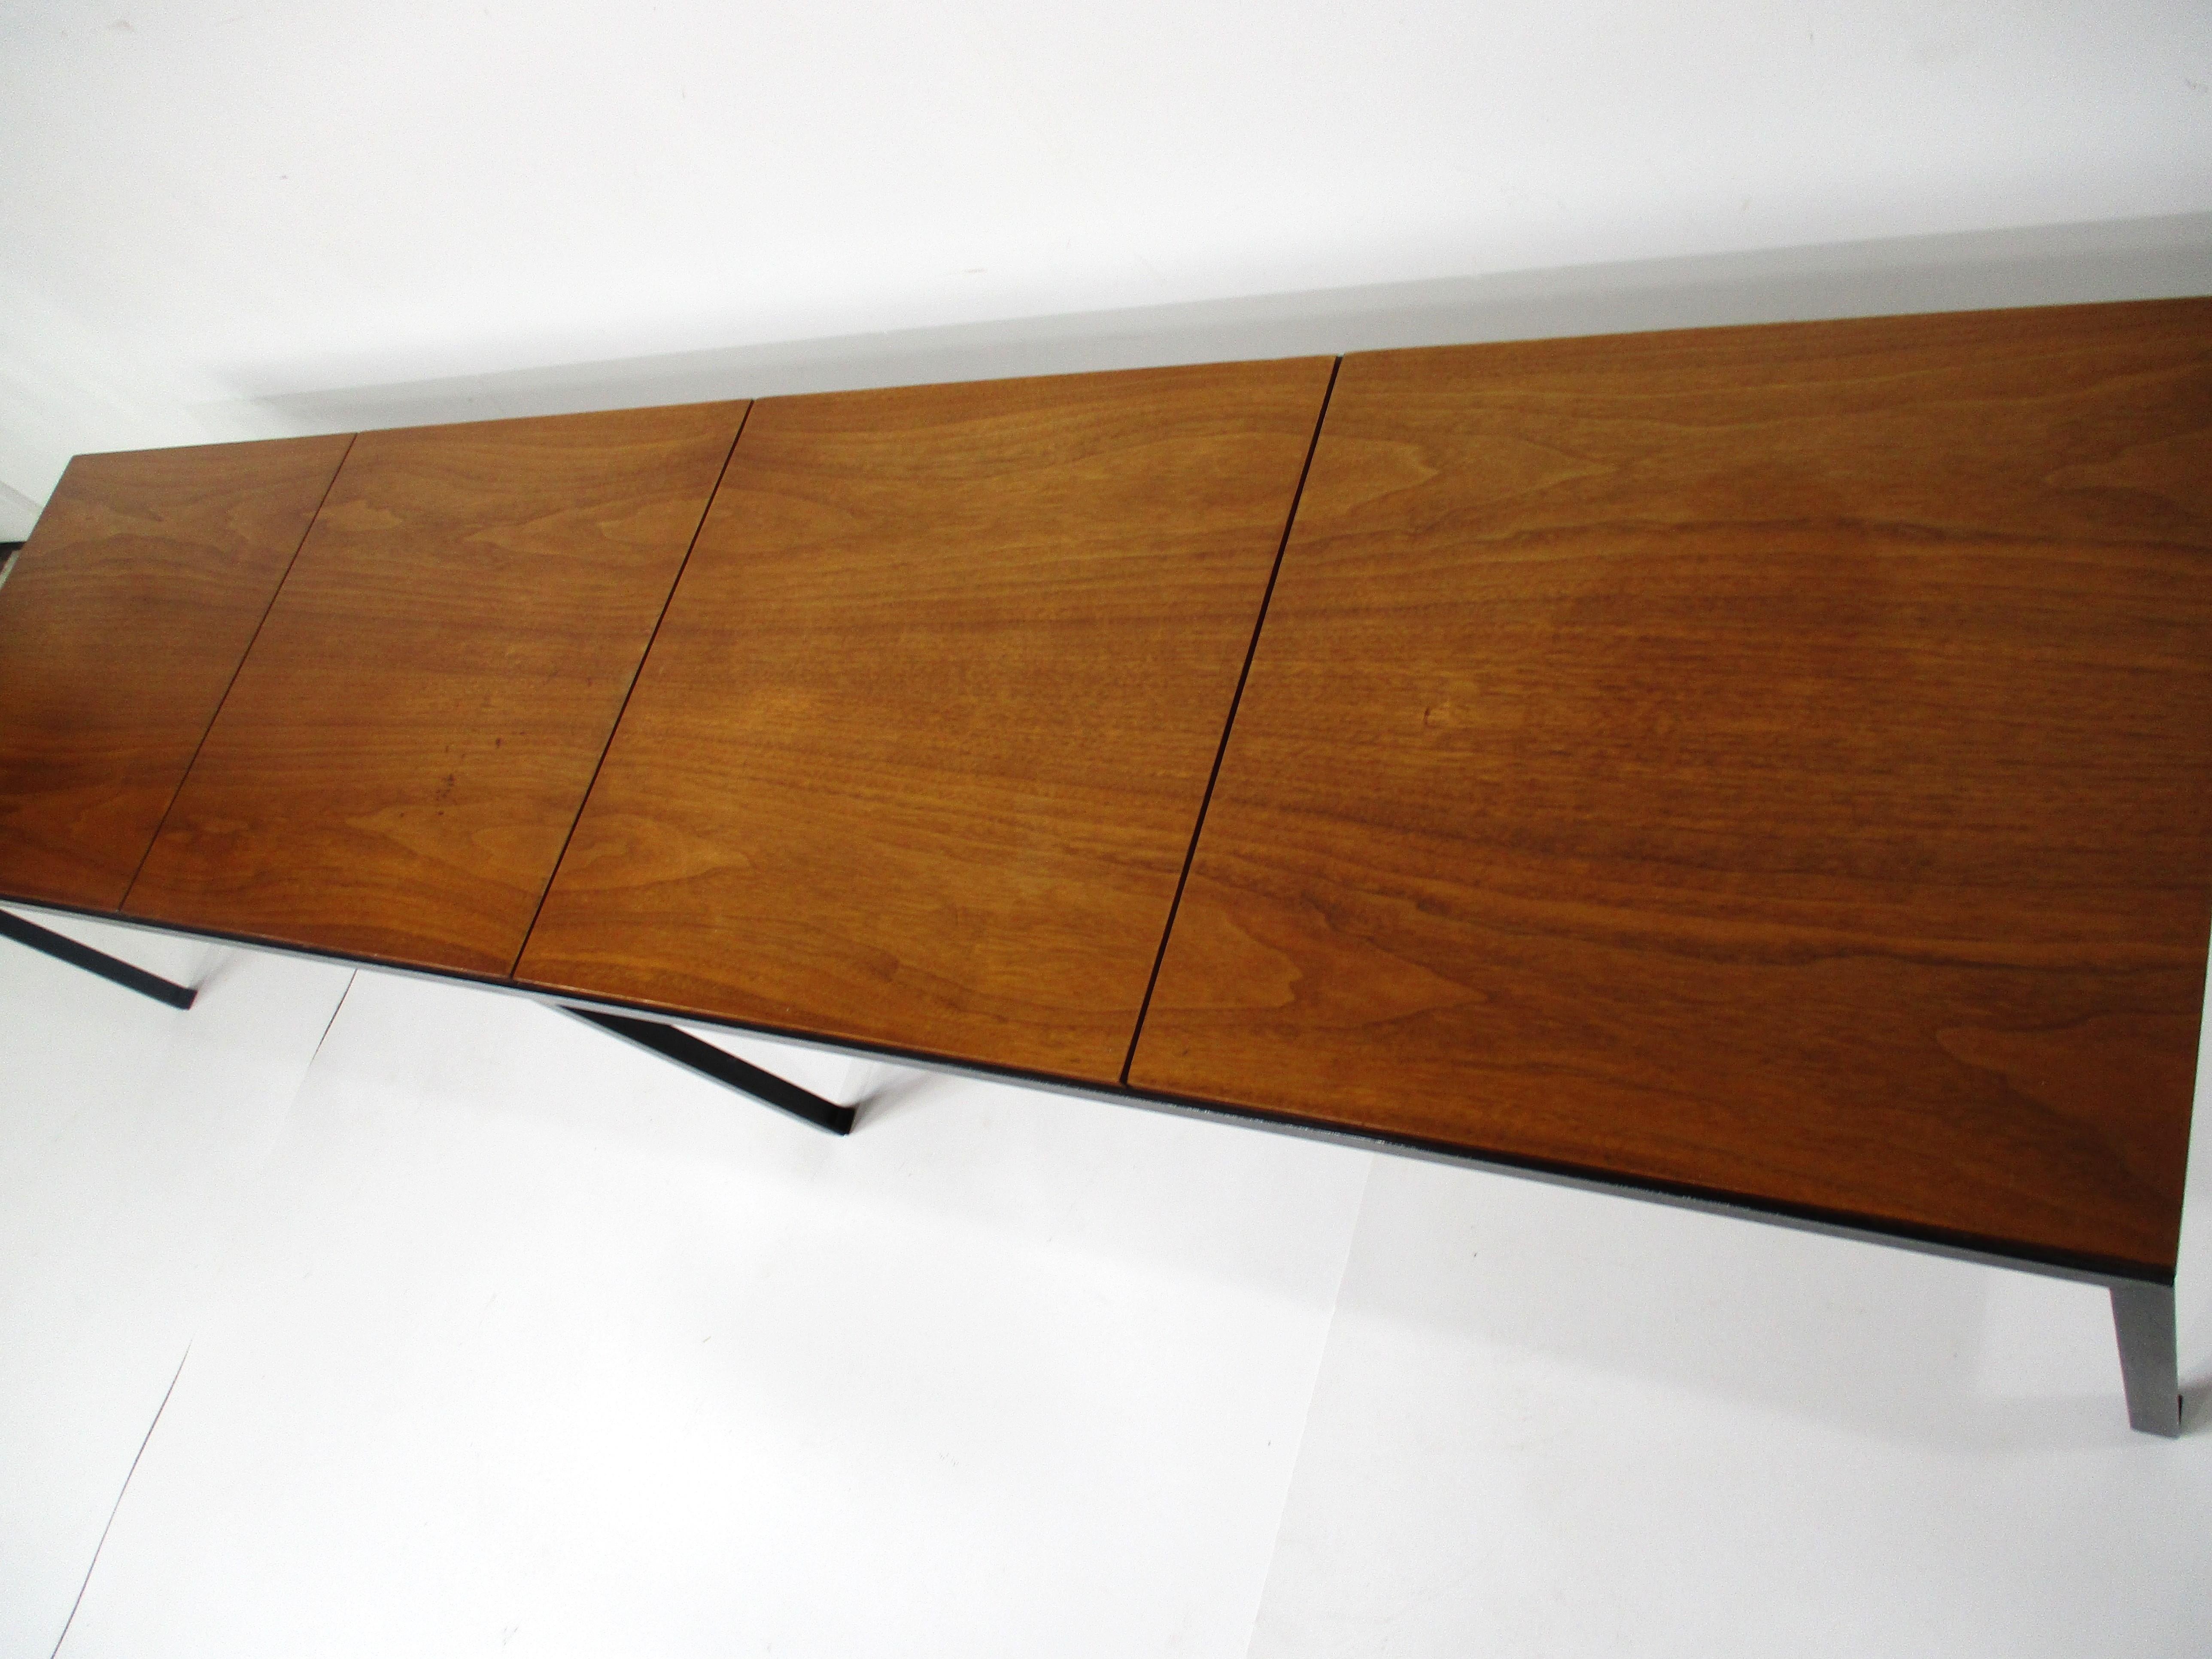 Steel Early T Angle Walnut Coffee Table / Bench by Florence Knoll # 332 for Knoll (A)  For Sale